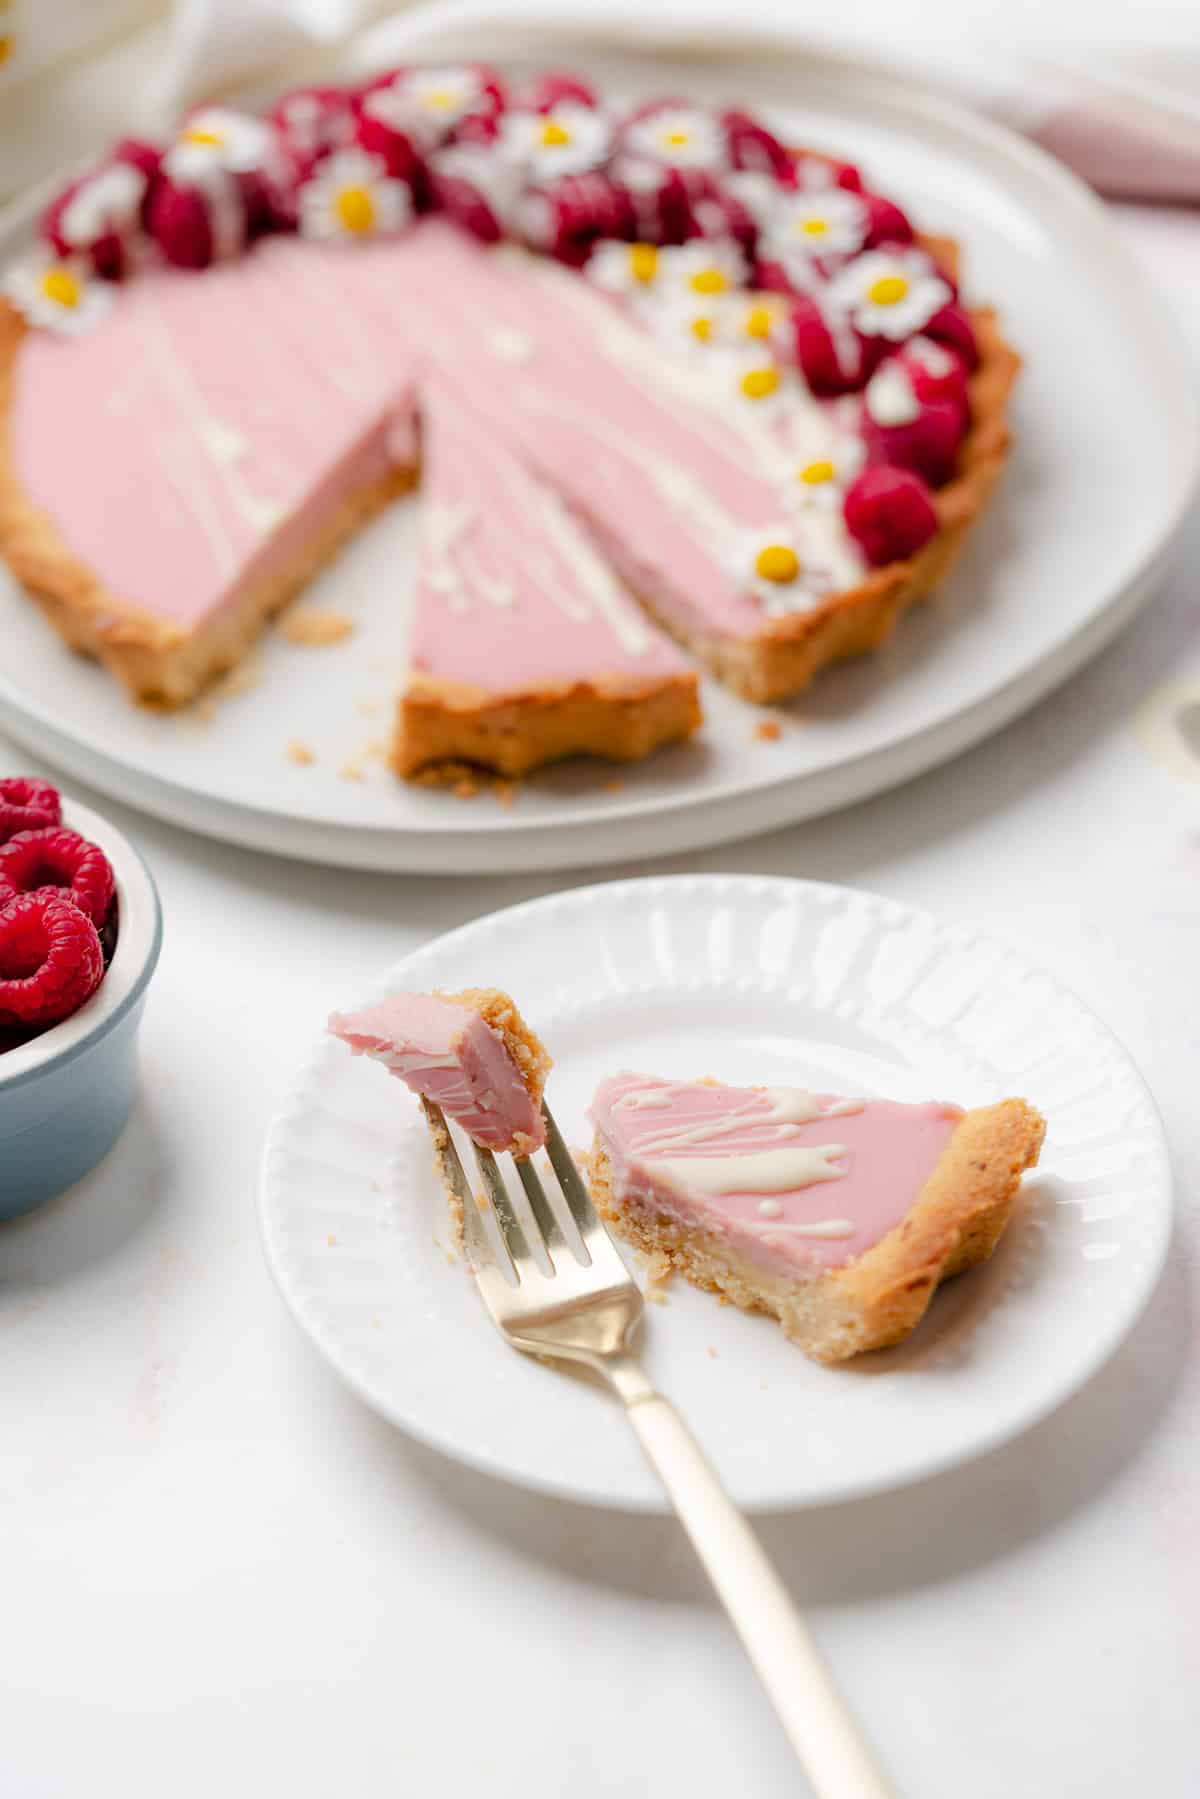 white chocolate raspberry tart on a plate with a slice taken out with a gold fork on another plate